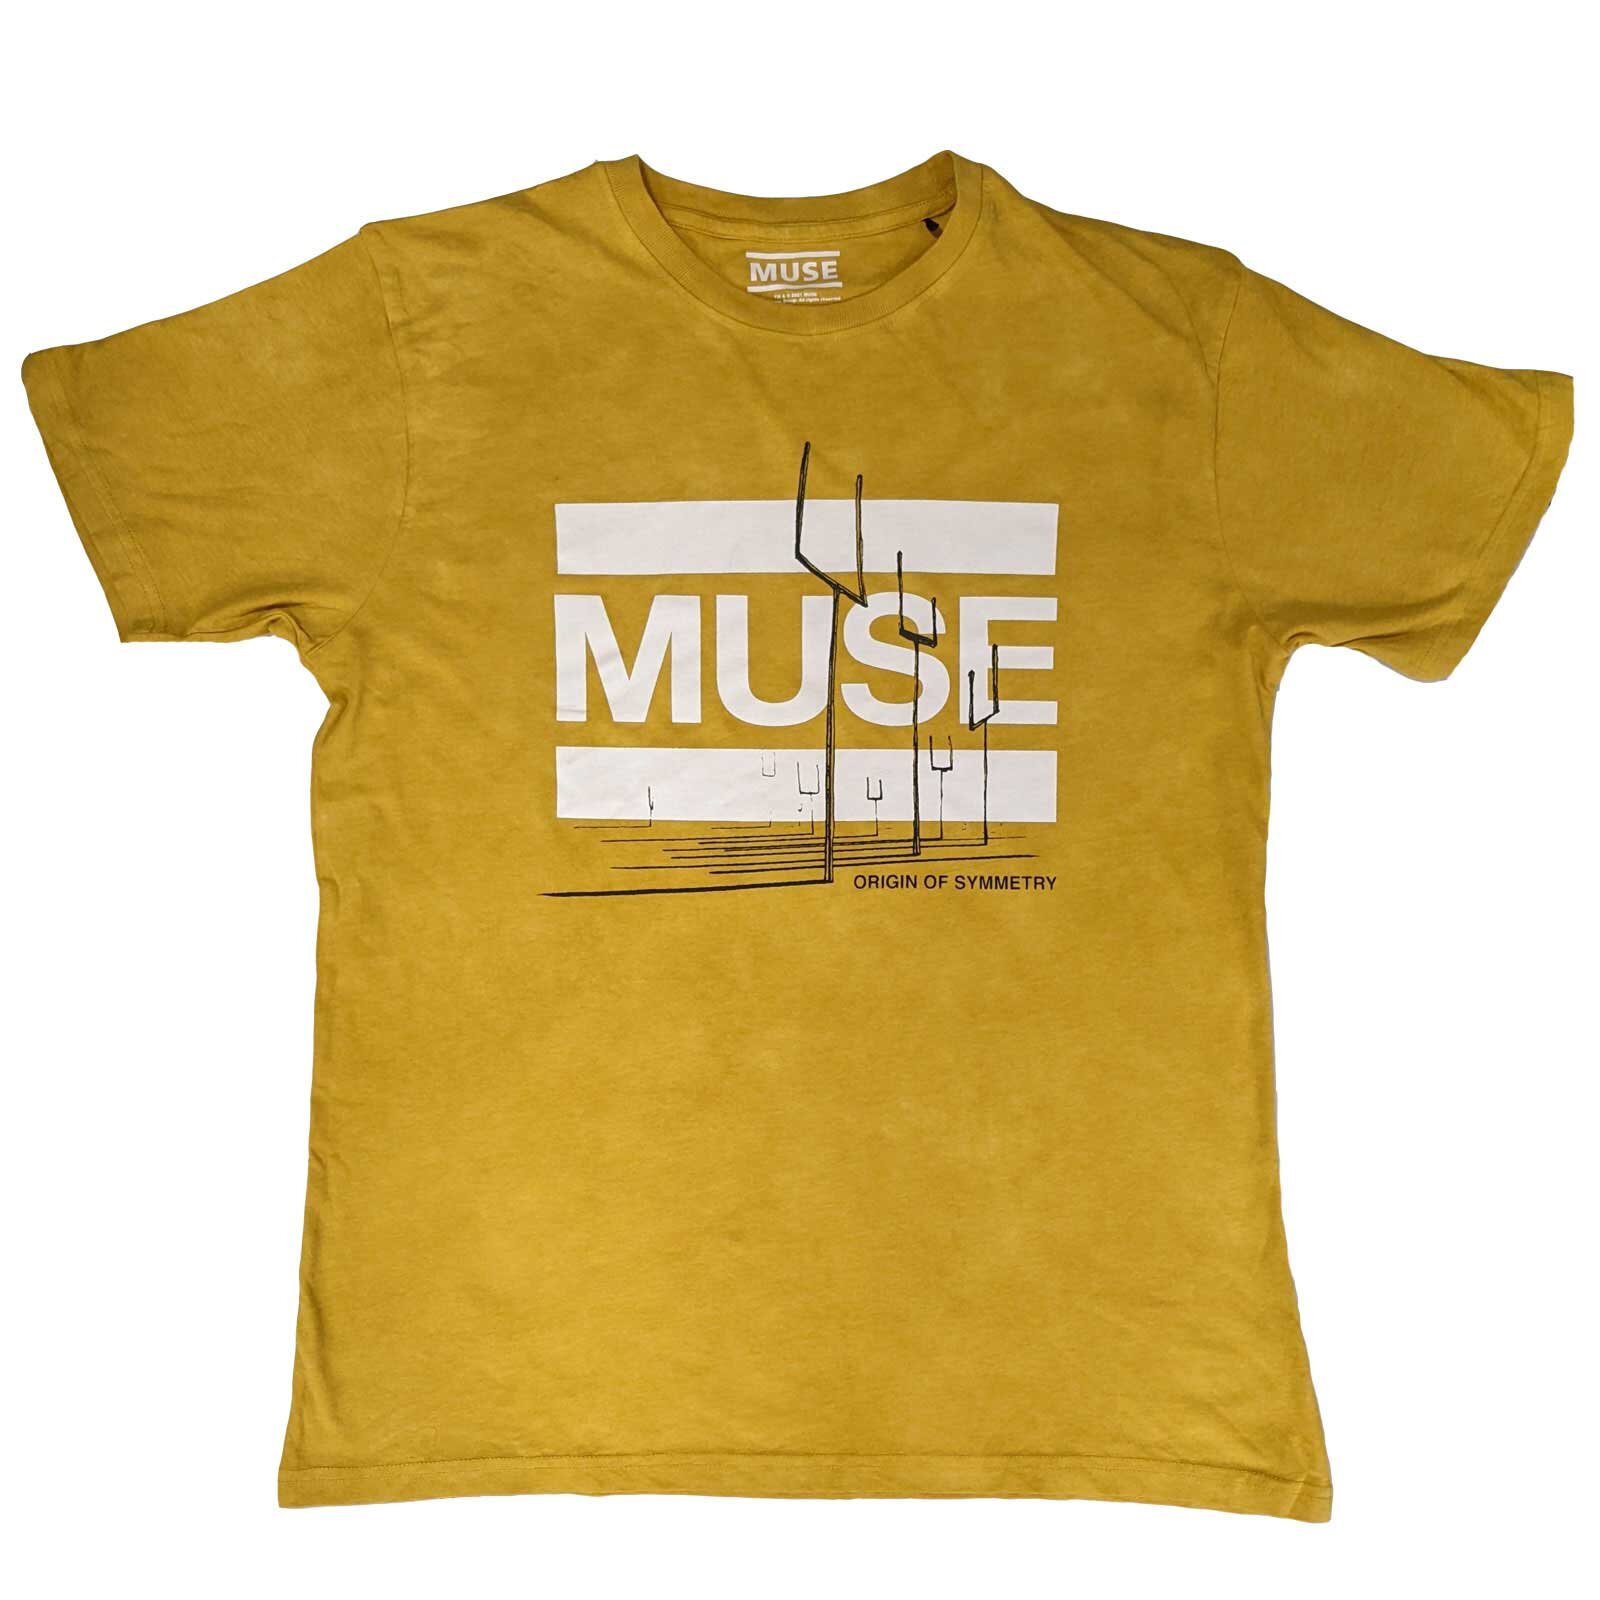 Rockoff MUSE Unisex T-Shirt: Origin of Symmetry (Wash Collection) Size M : photo 1